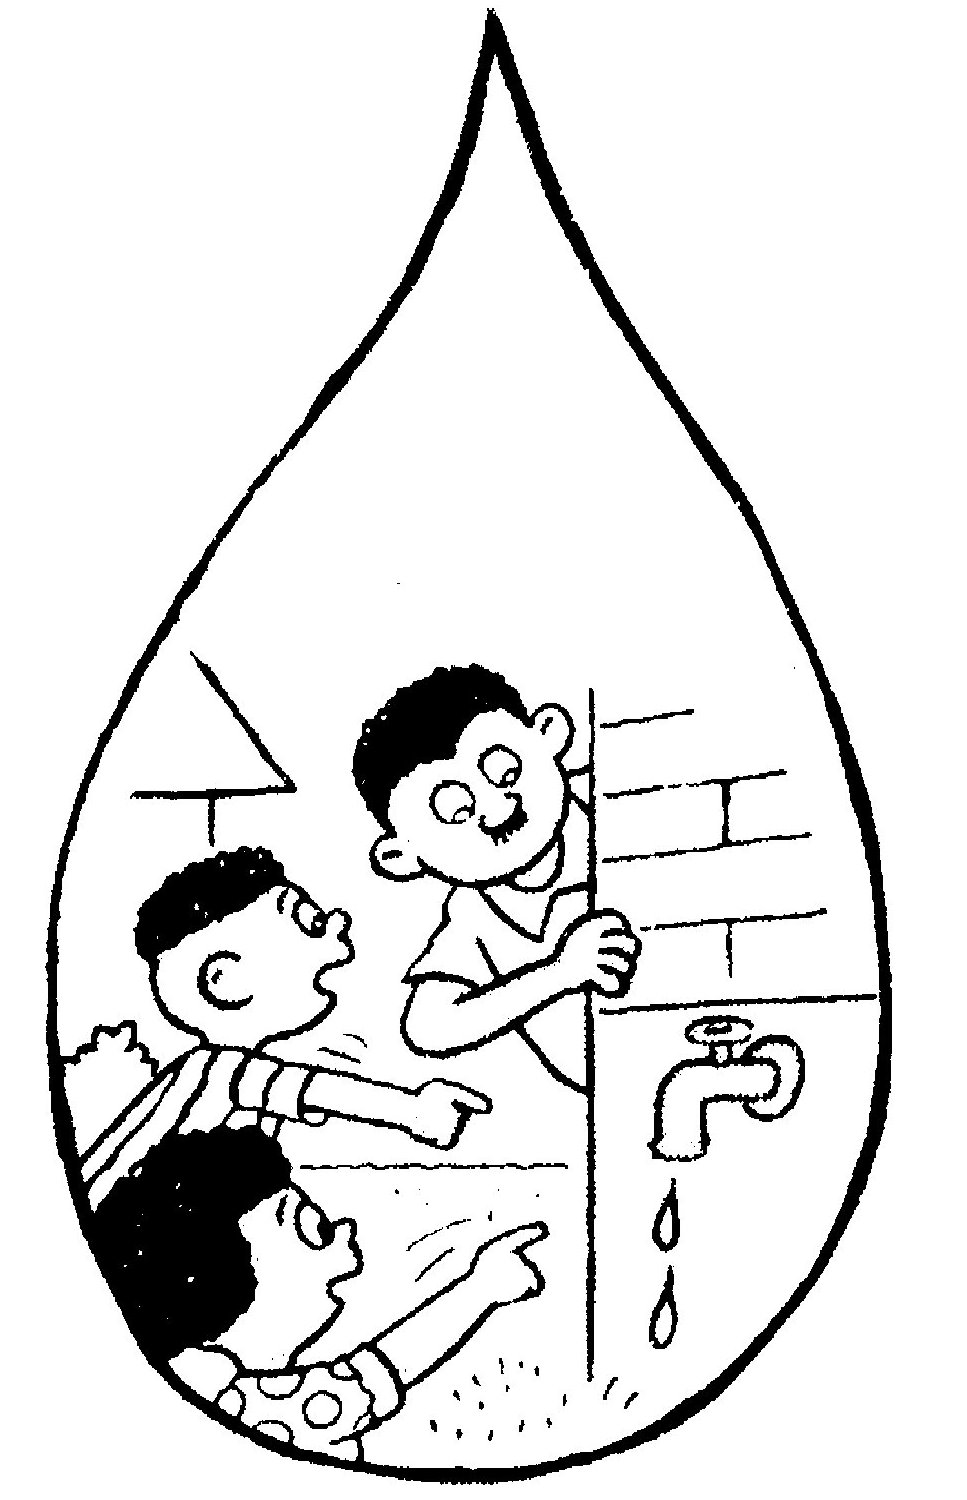 Clean water clipart black and white 